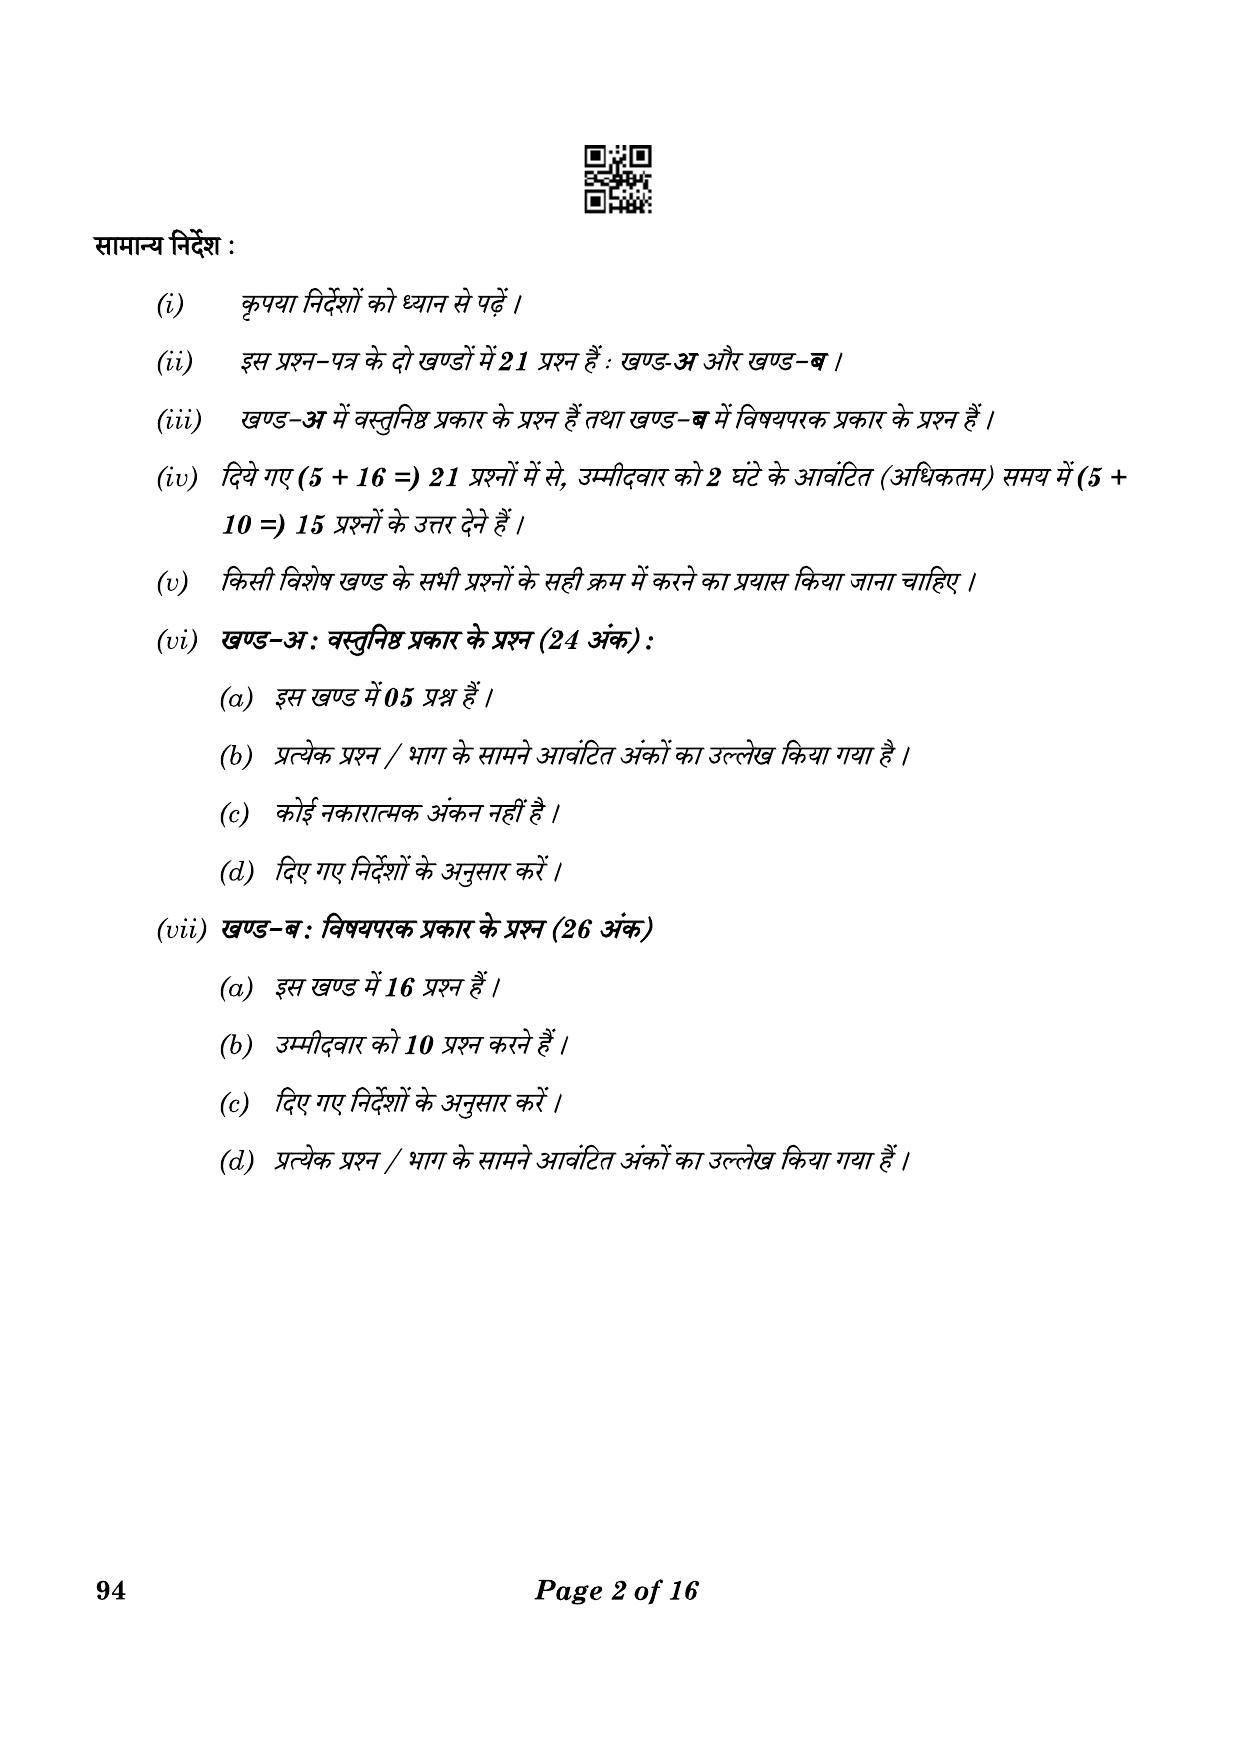 CBSE Class 10 94 Beauty And Wellness 2023 Question Paper - Page 2